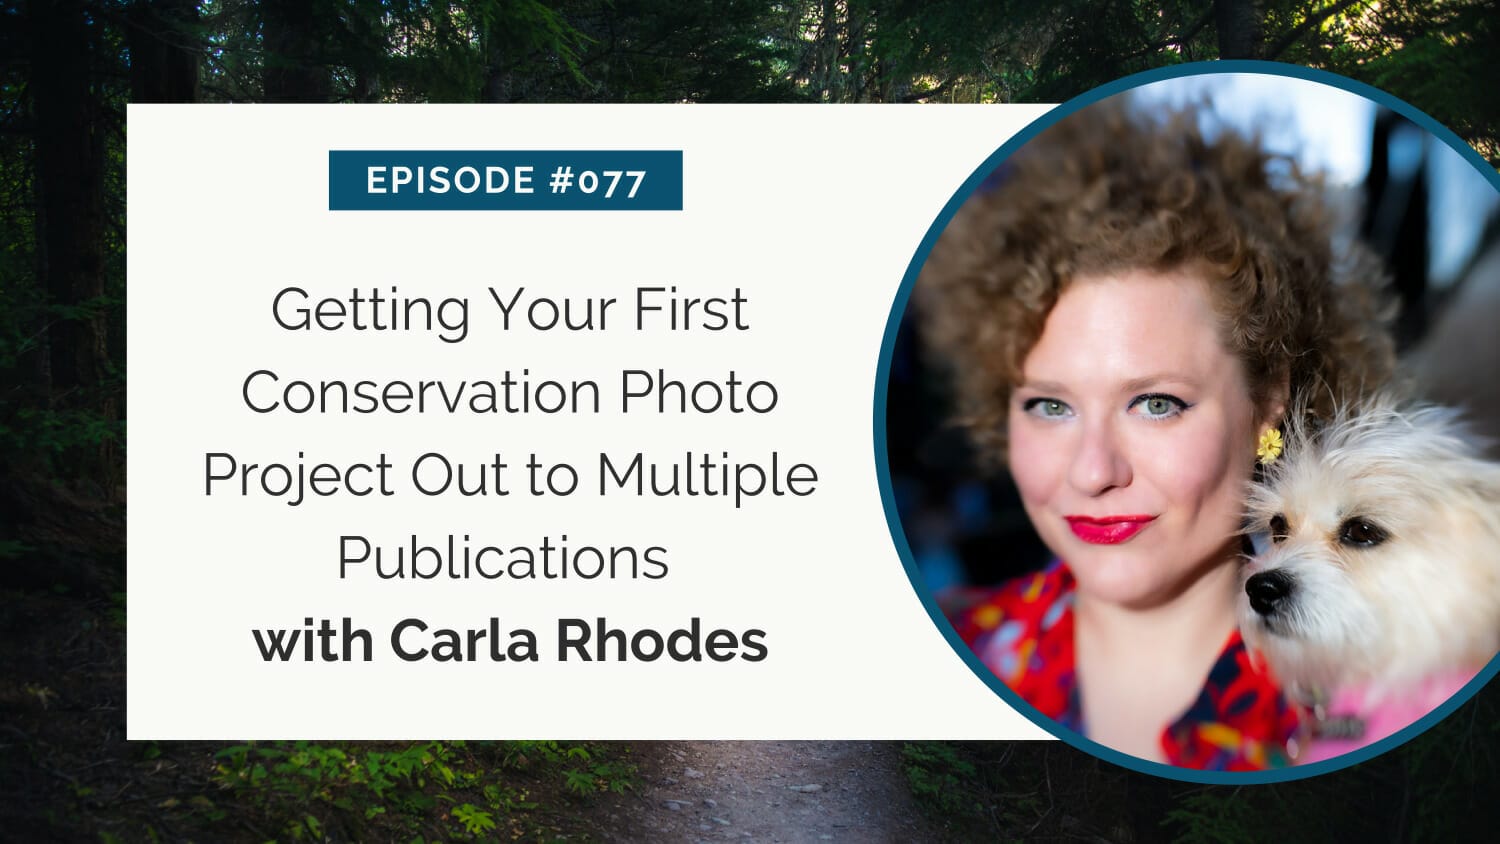 Podcast episode graphic featuring a guest named carla rhodes discussing how to publish a first conservation photo project, accompanied by an inset portrait of a woman with curly hair holding a small dog.